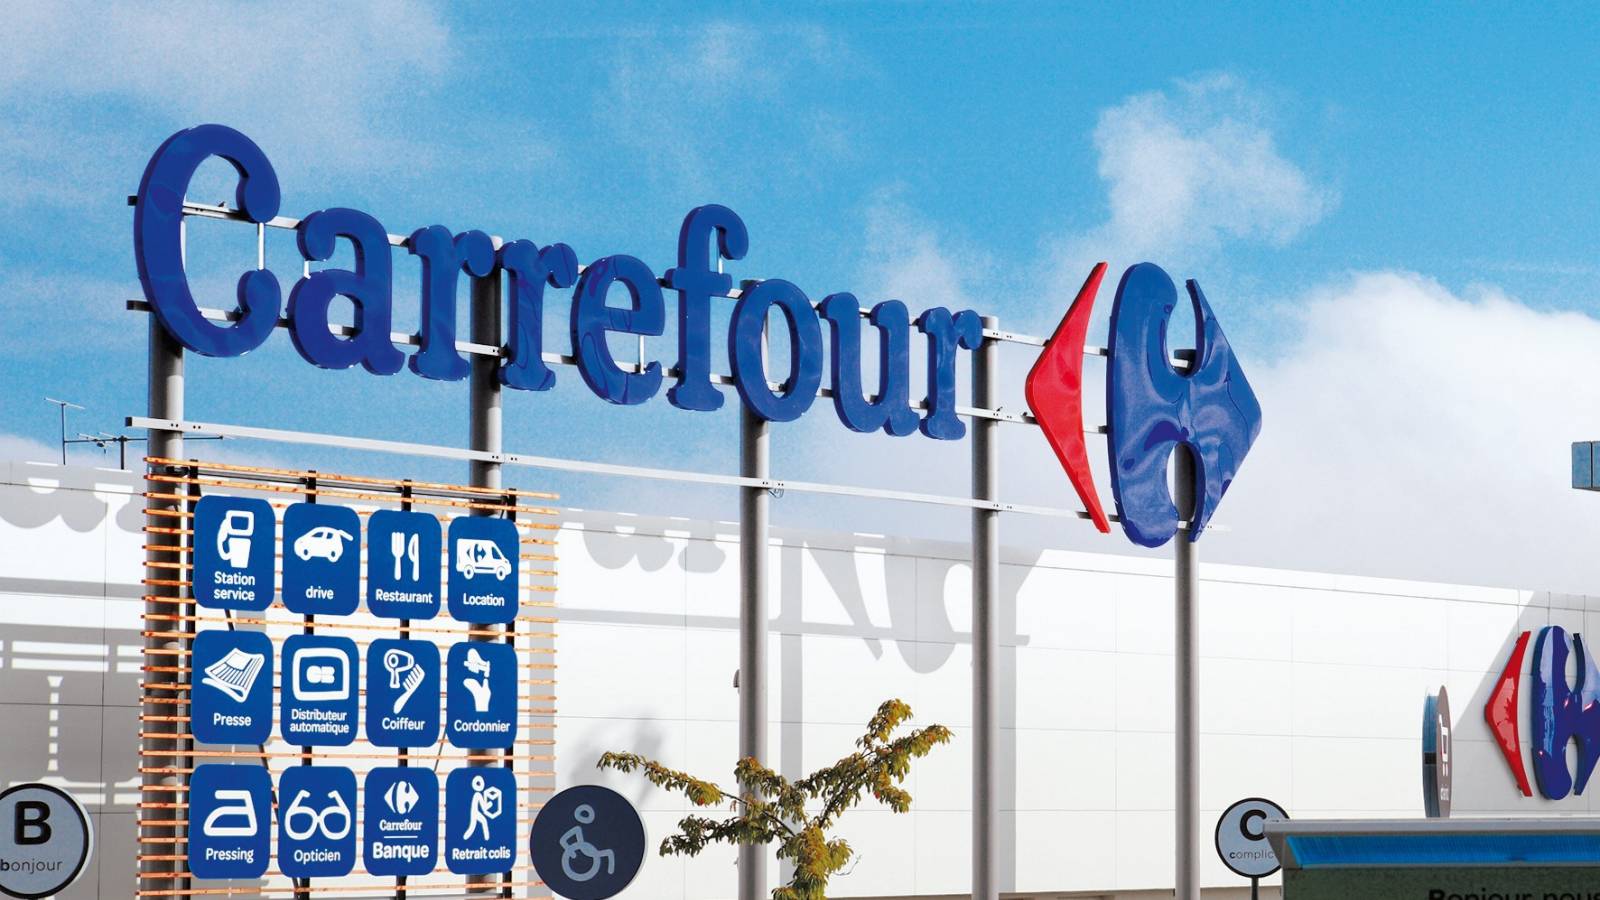 Electronic Carrefour